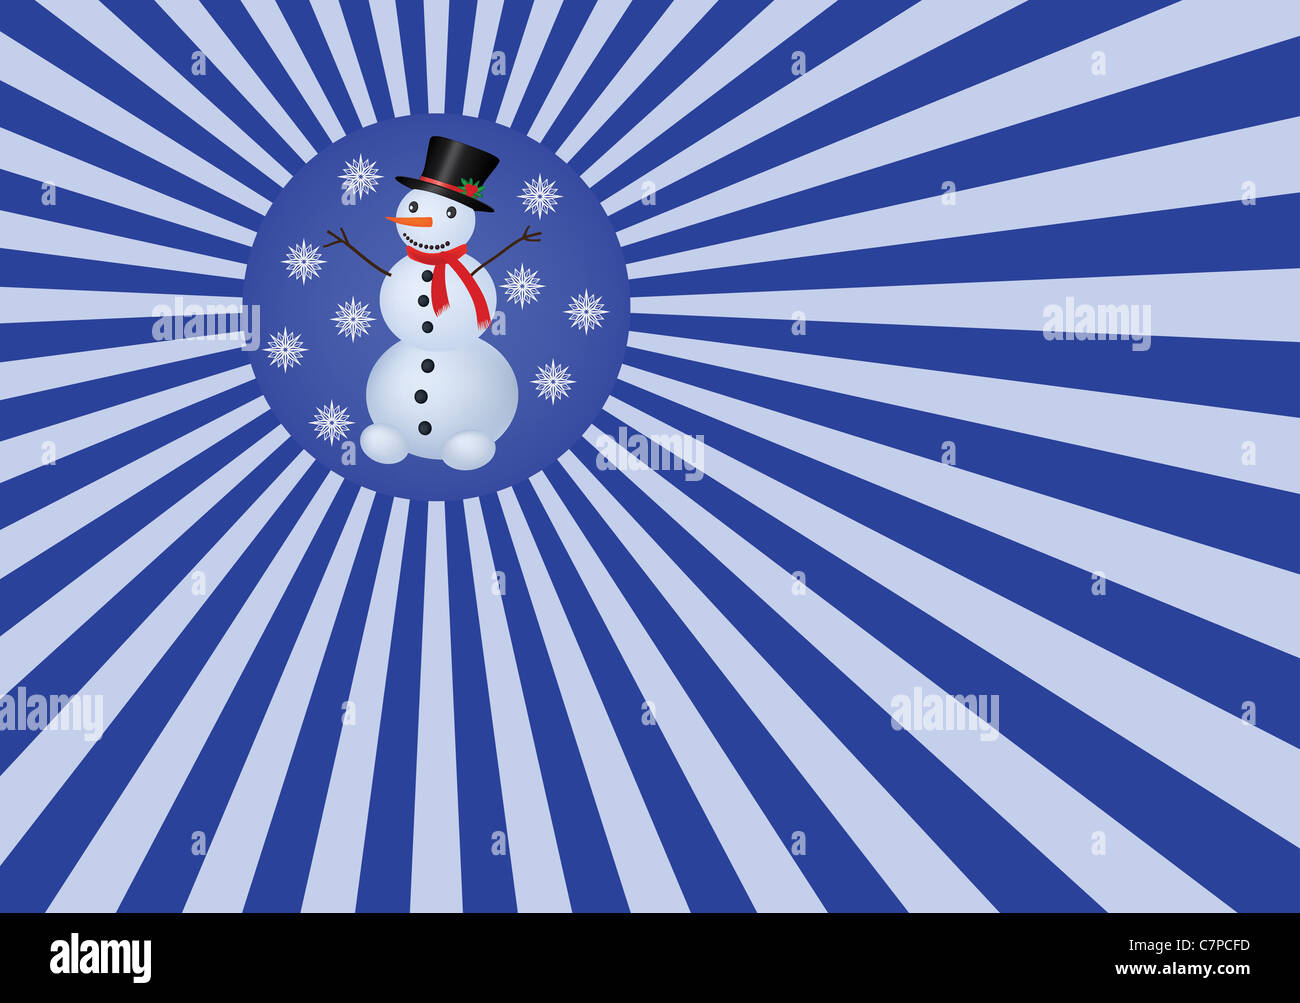 Abstract background with snowman Banque D'Images